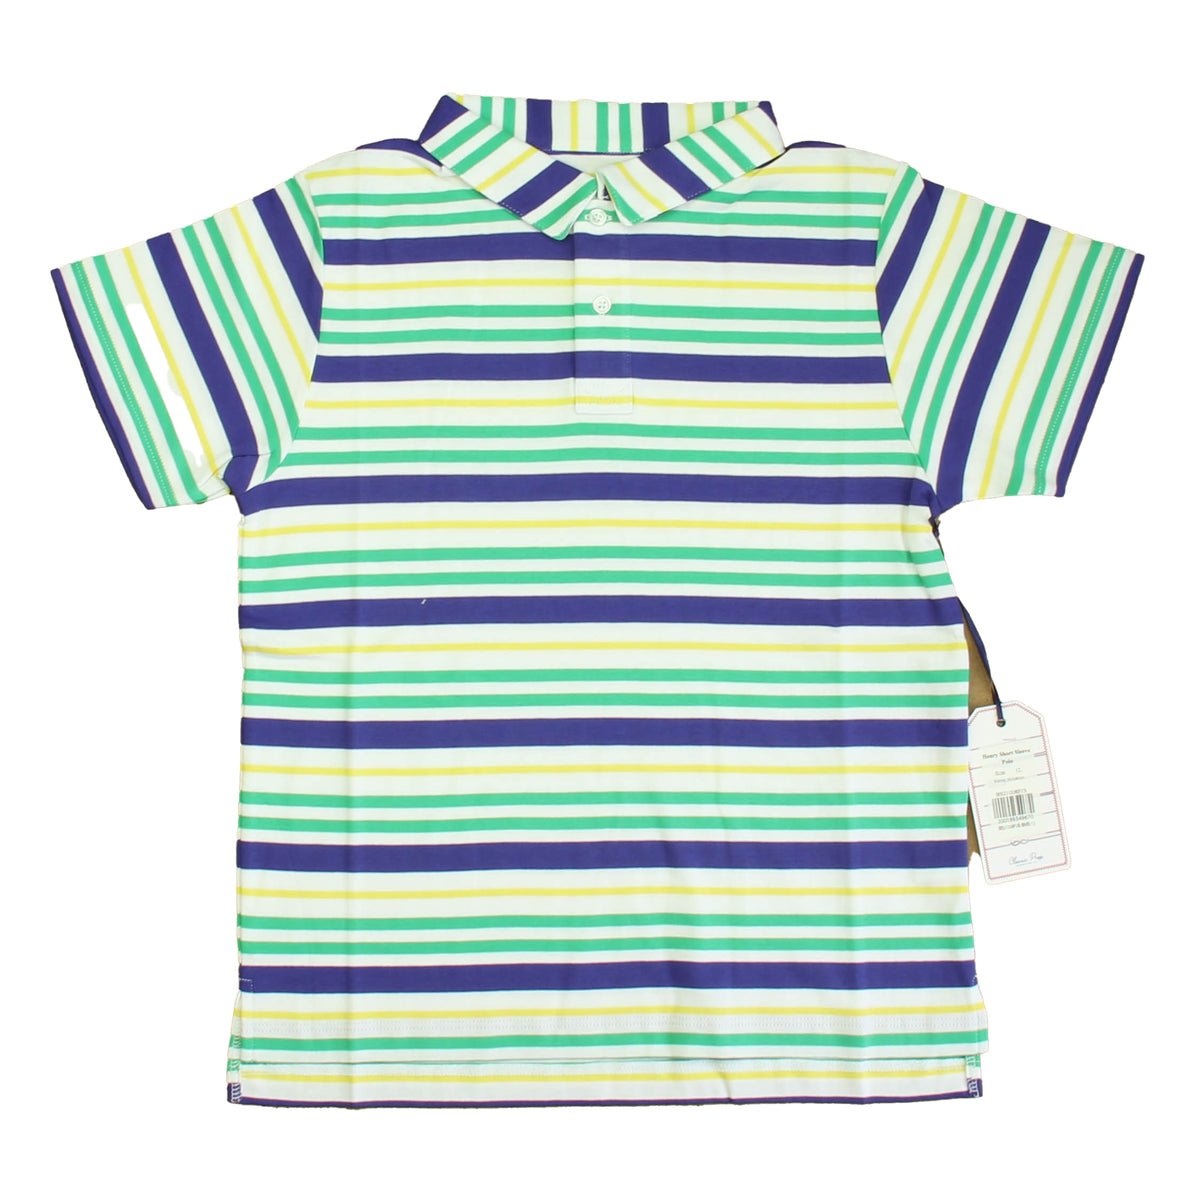 New with Tags: Blarney Multistripe Top size: 6-14 Years -- FINAL SALE